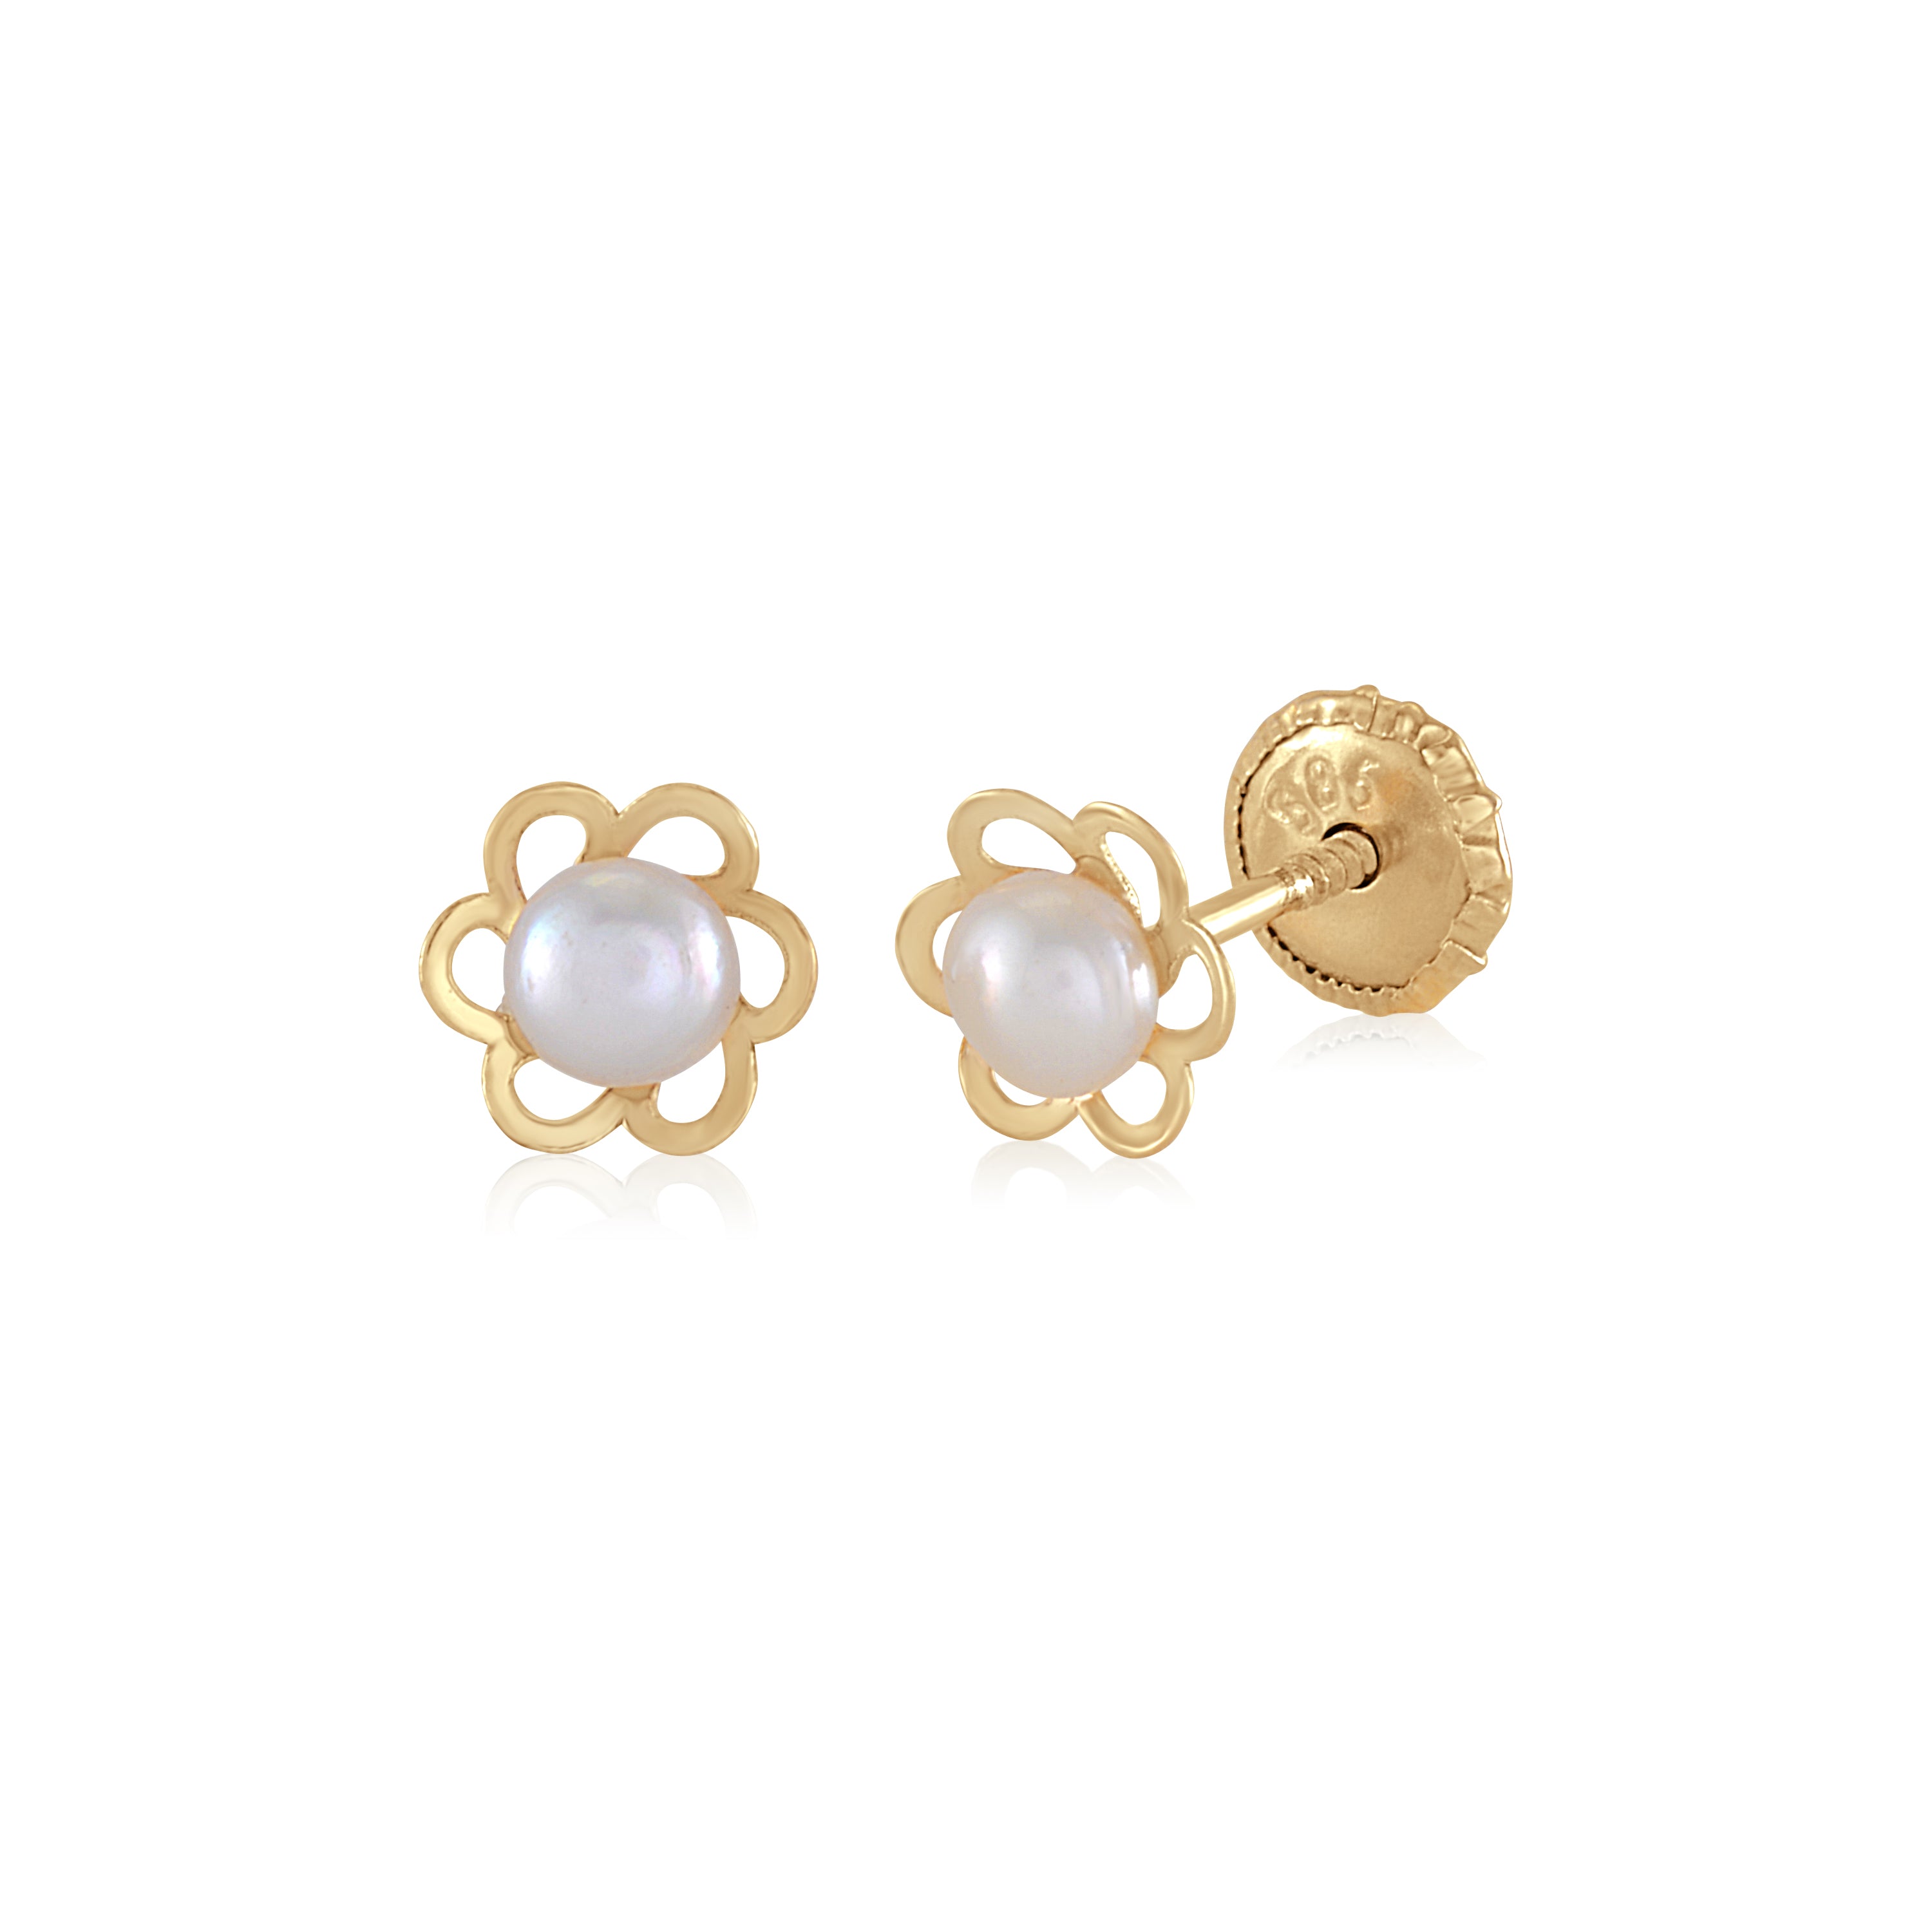 MASSETE 14k Yellow Gold Screwback Earrings Flower Open with Cultured Pearl for Baby and Children